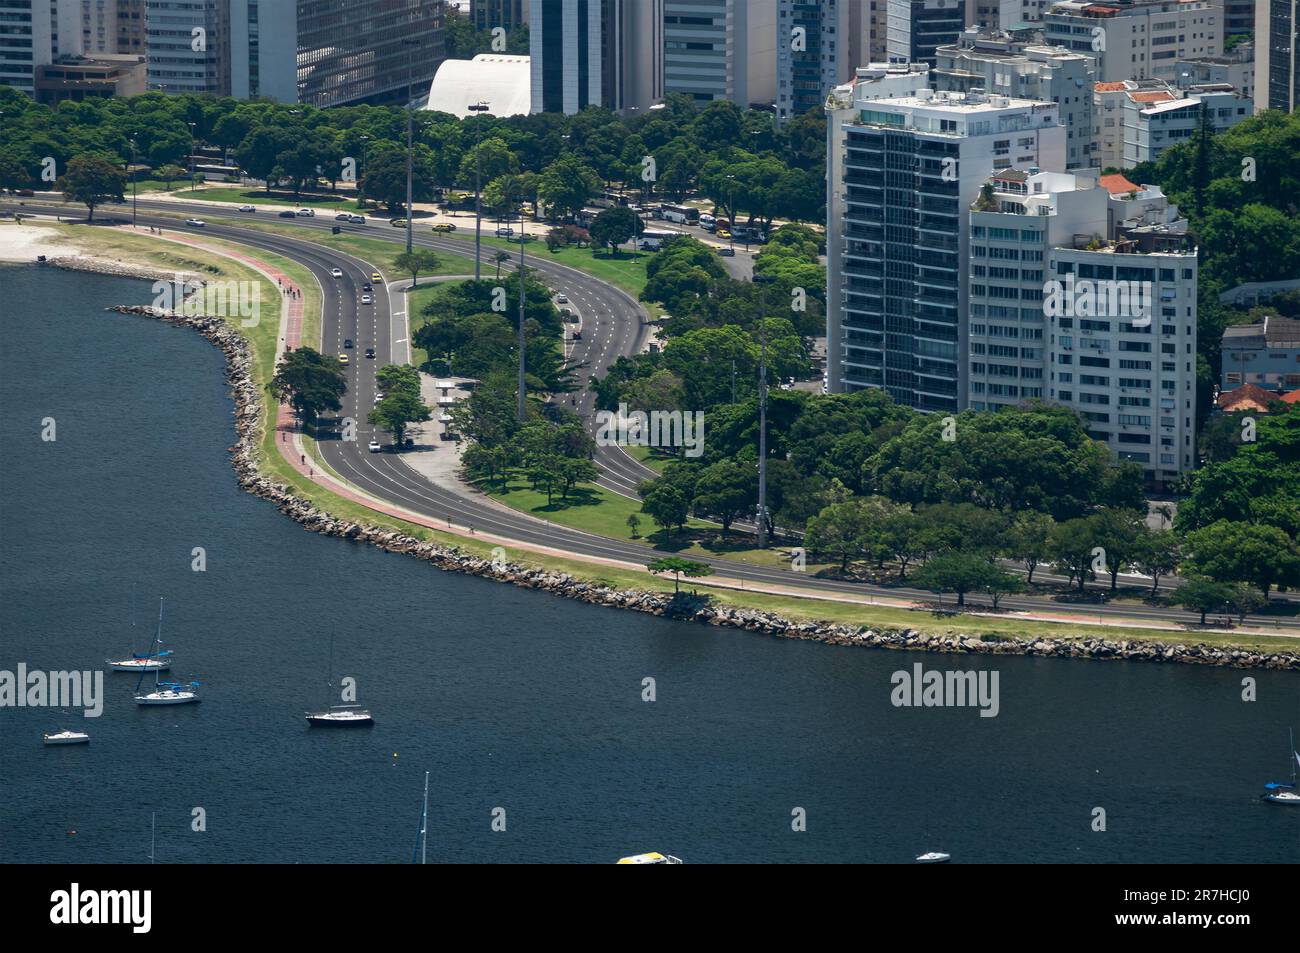 View of Botafogo district coastline with Guanabara bay waters full of  sailboats and vessels anchored nearby the Yatch Club under summer sunny day  Stock Photo - Alamy